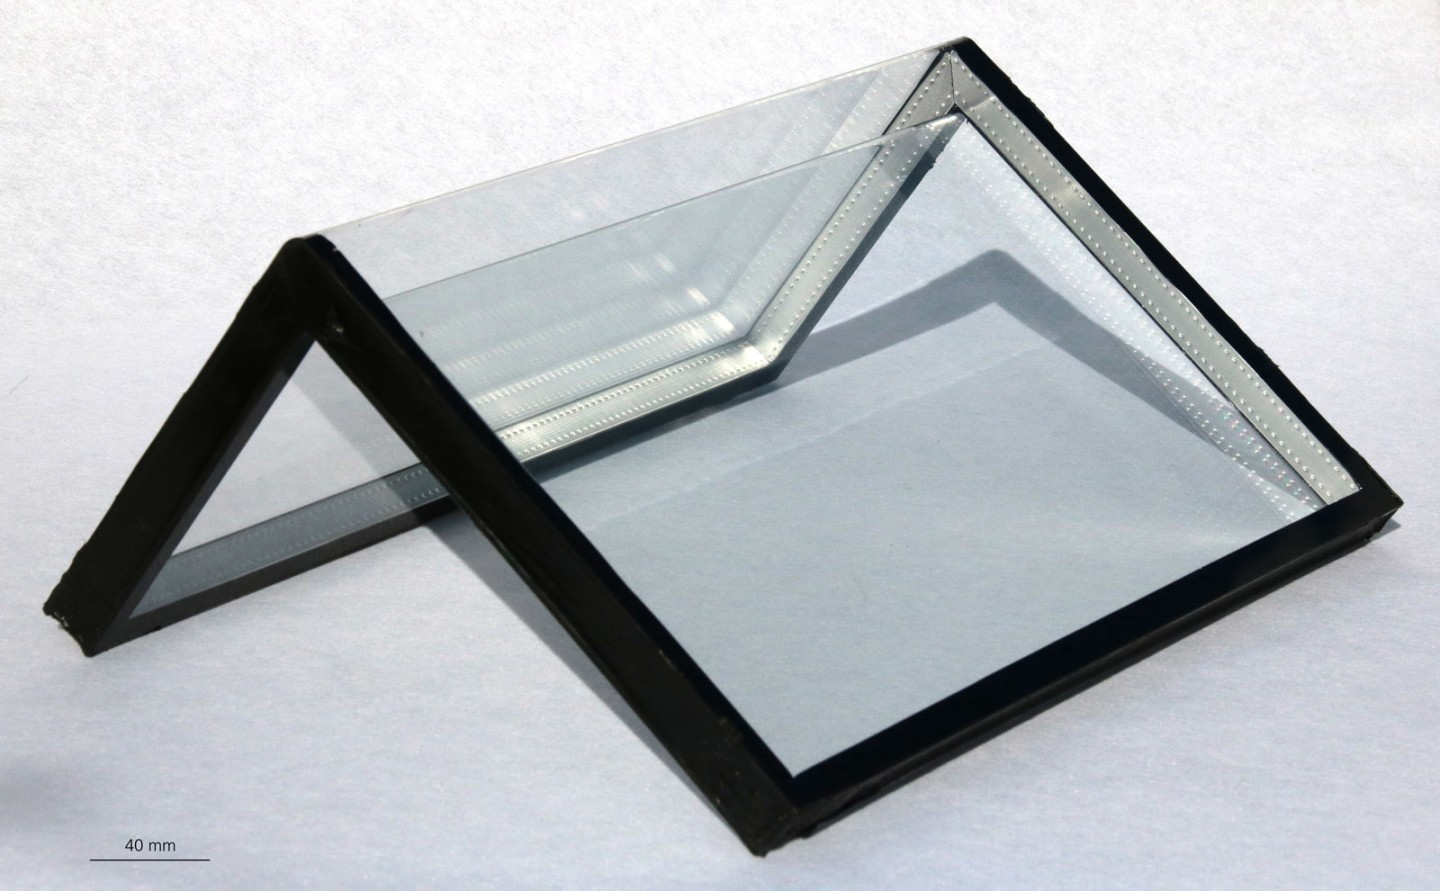 German Scientists Develop the New Technology that Bends Glass Sheets at Right Angles